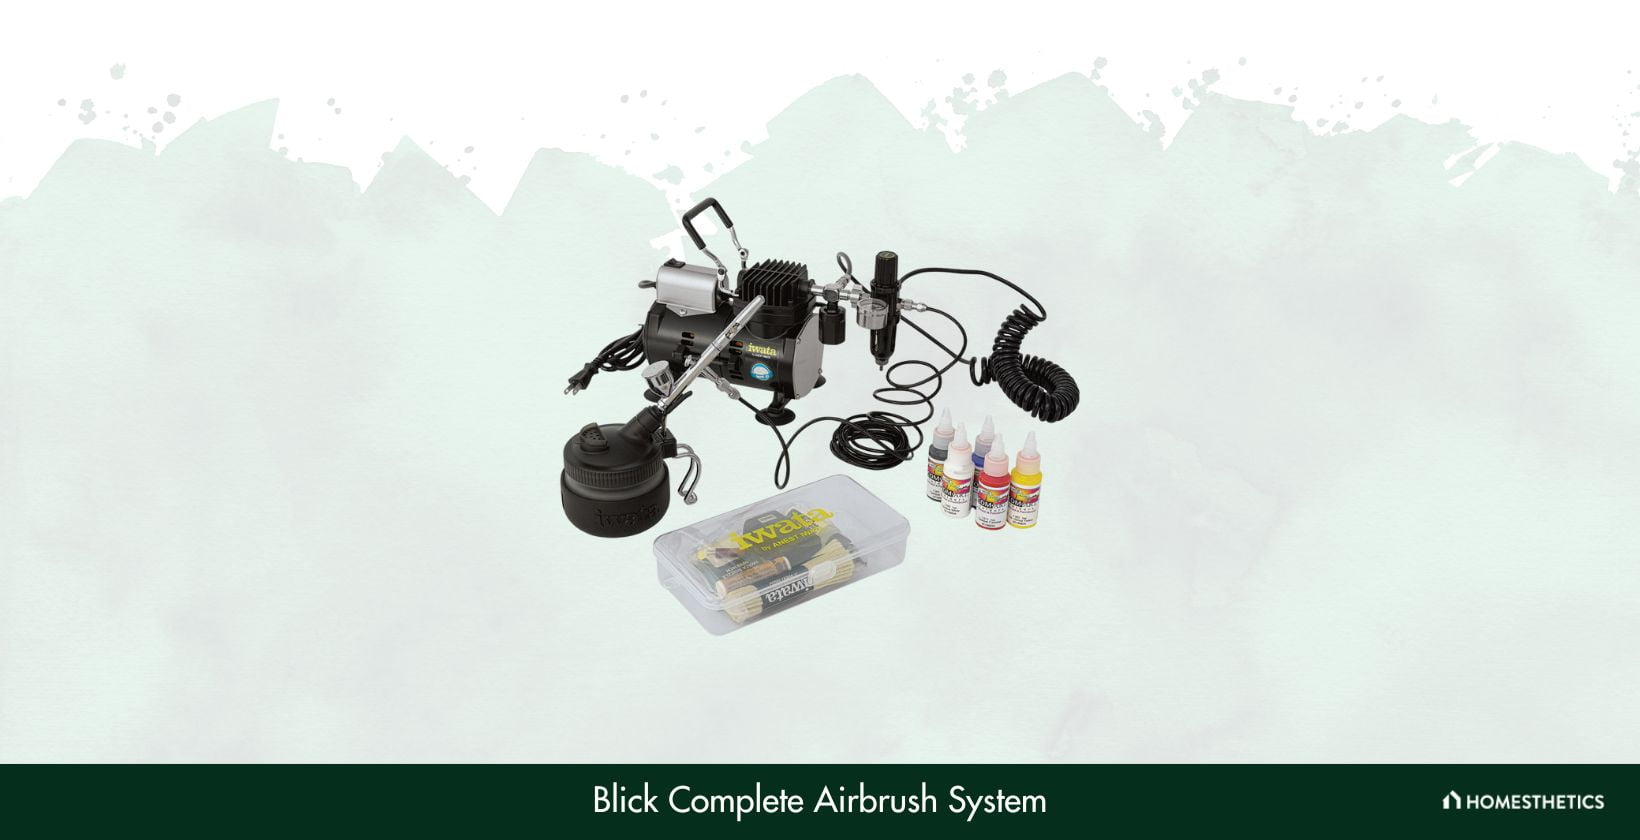 Blick Complete Airbrush System